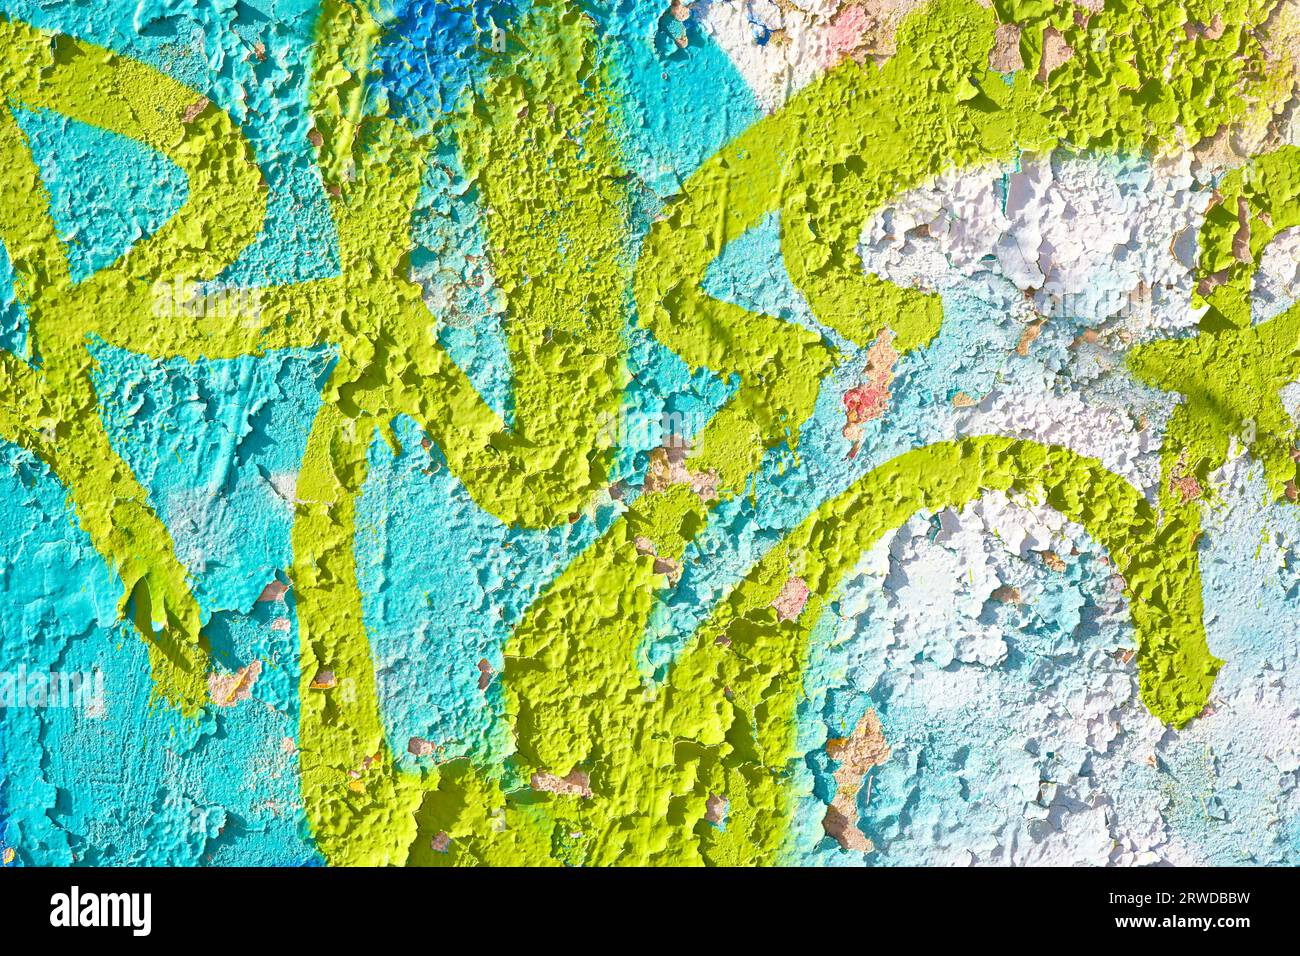 Paint peeling from a concrete wall where graffiti has been spraypainted. Stock Photo